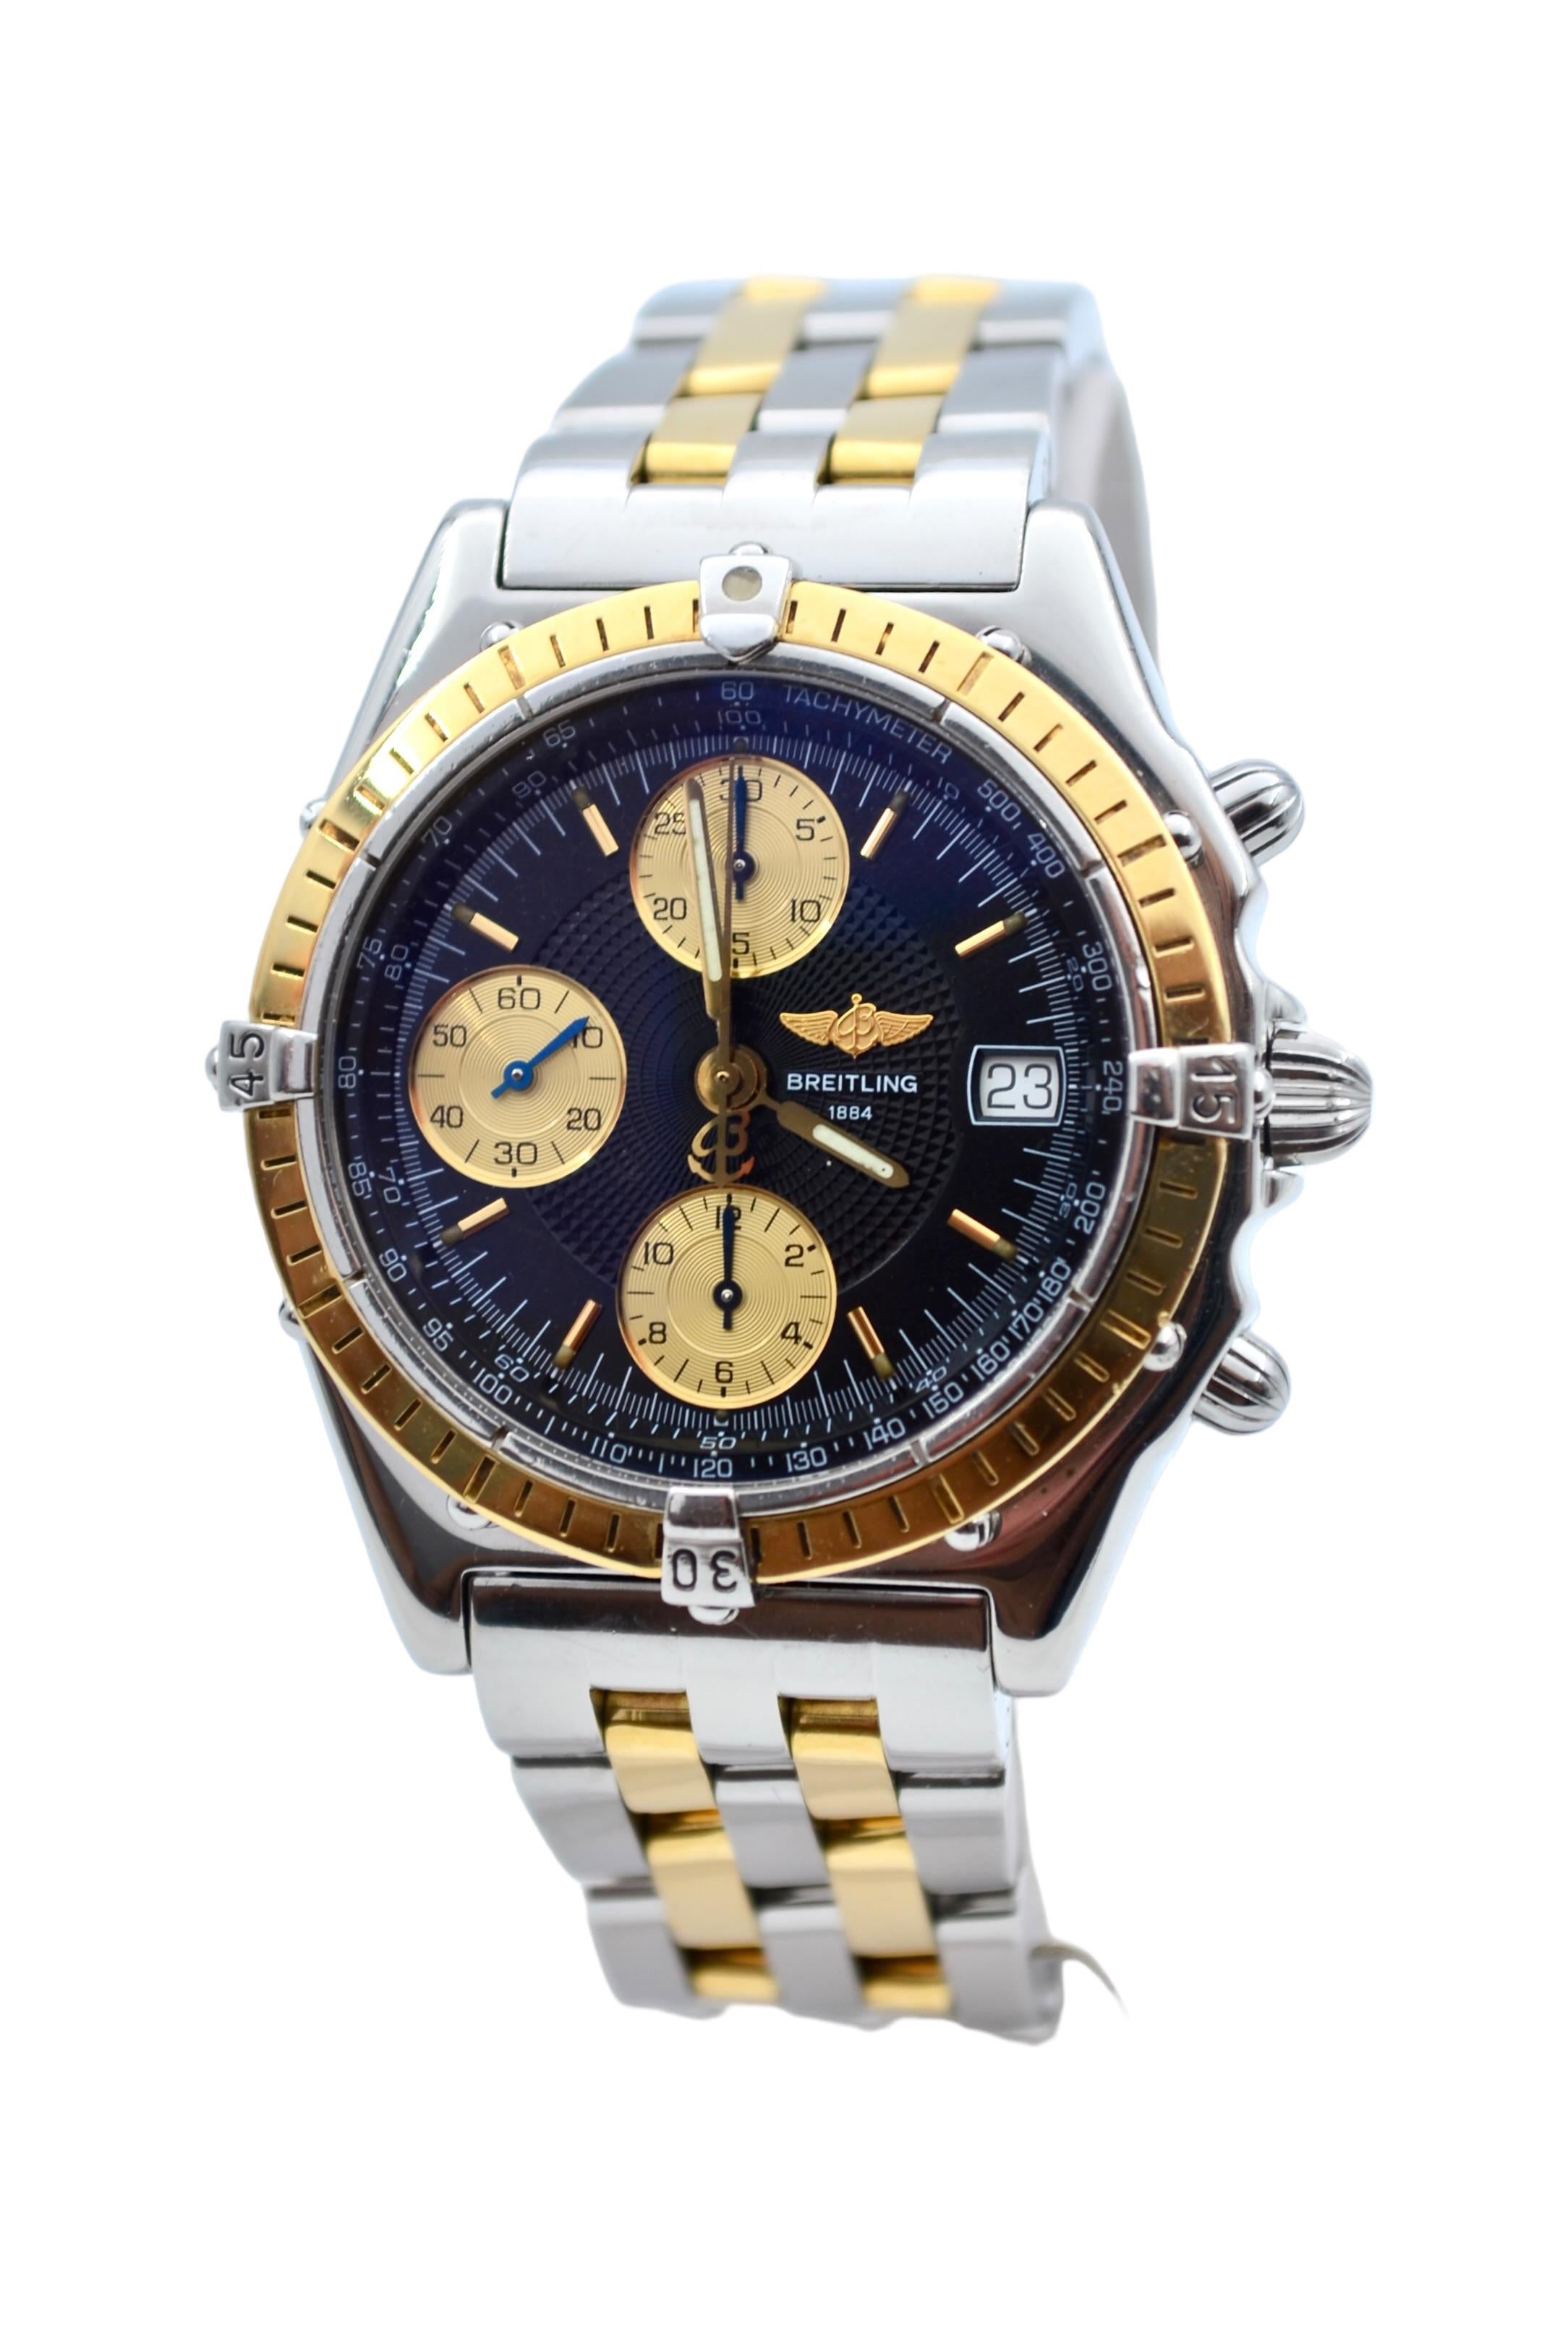 Breitling Chronomat Chronograph 39mm Gold&Steel Automatic Ref: D13050.1